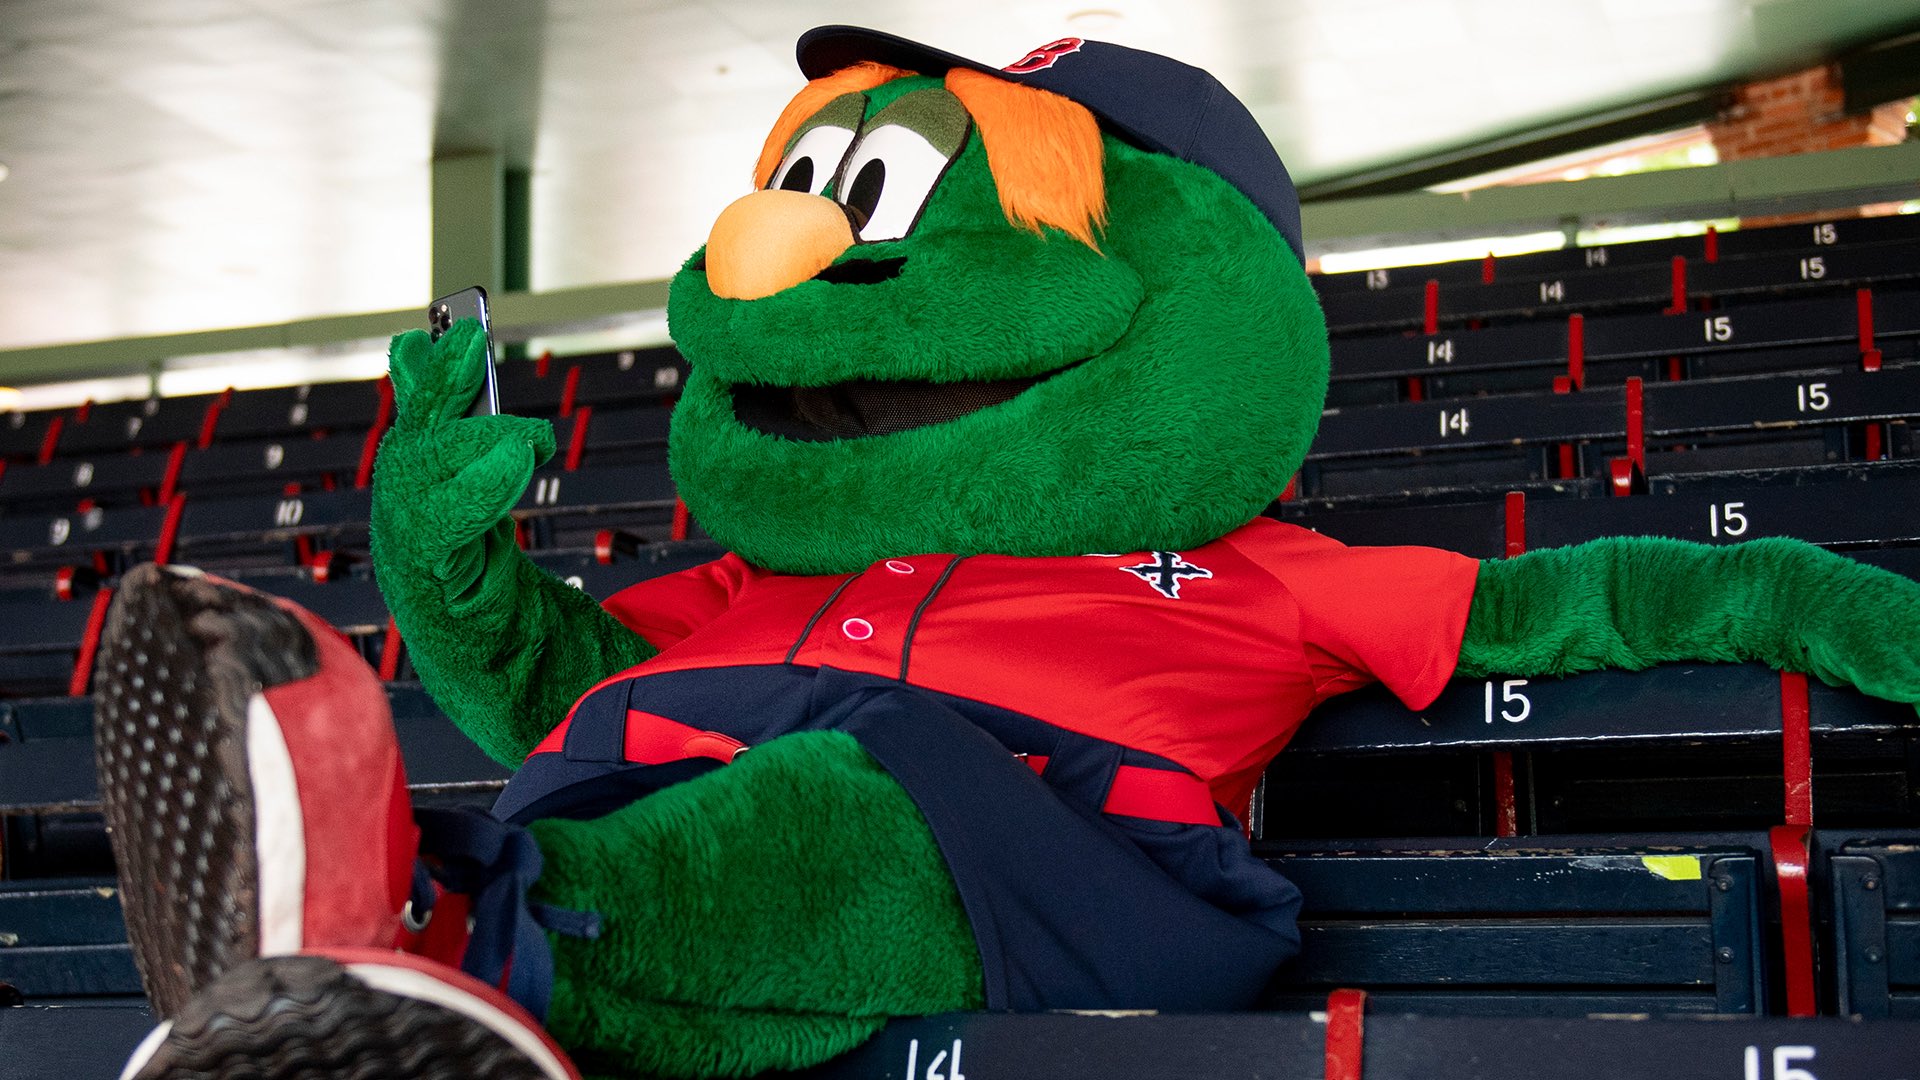 boston red sox mascots wally the green monster